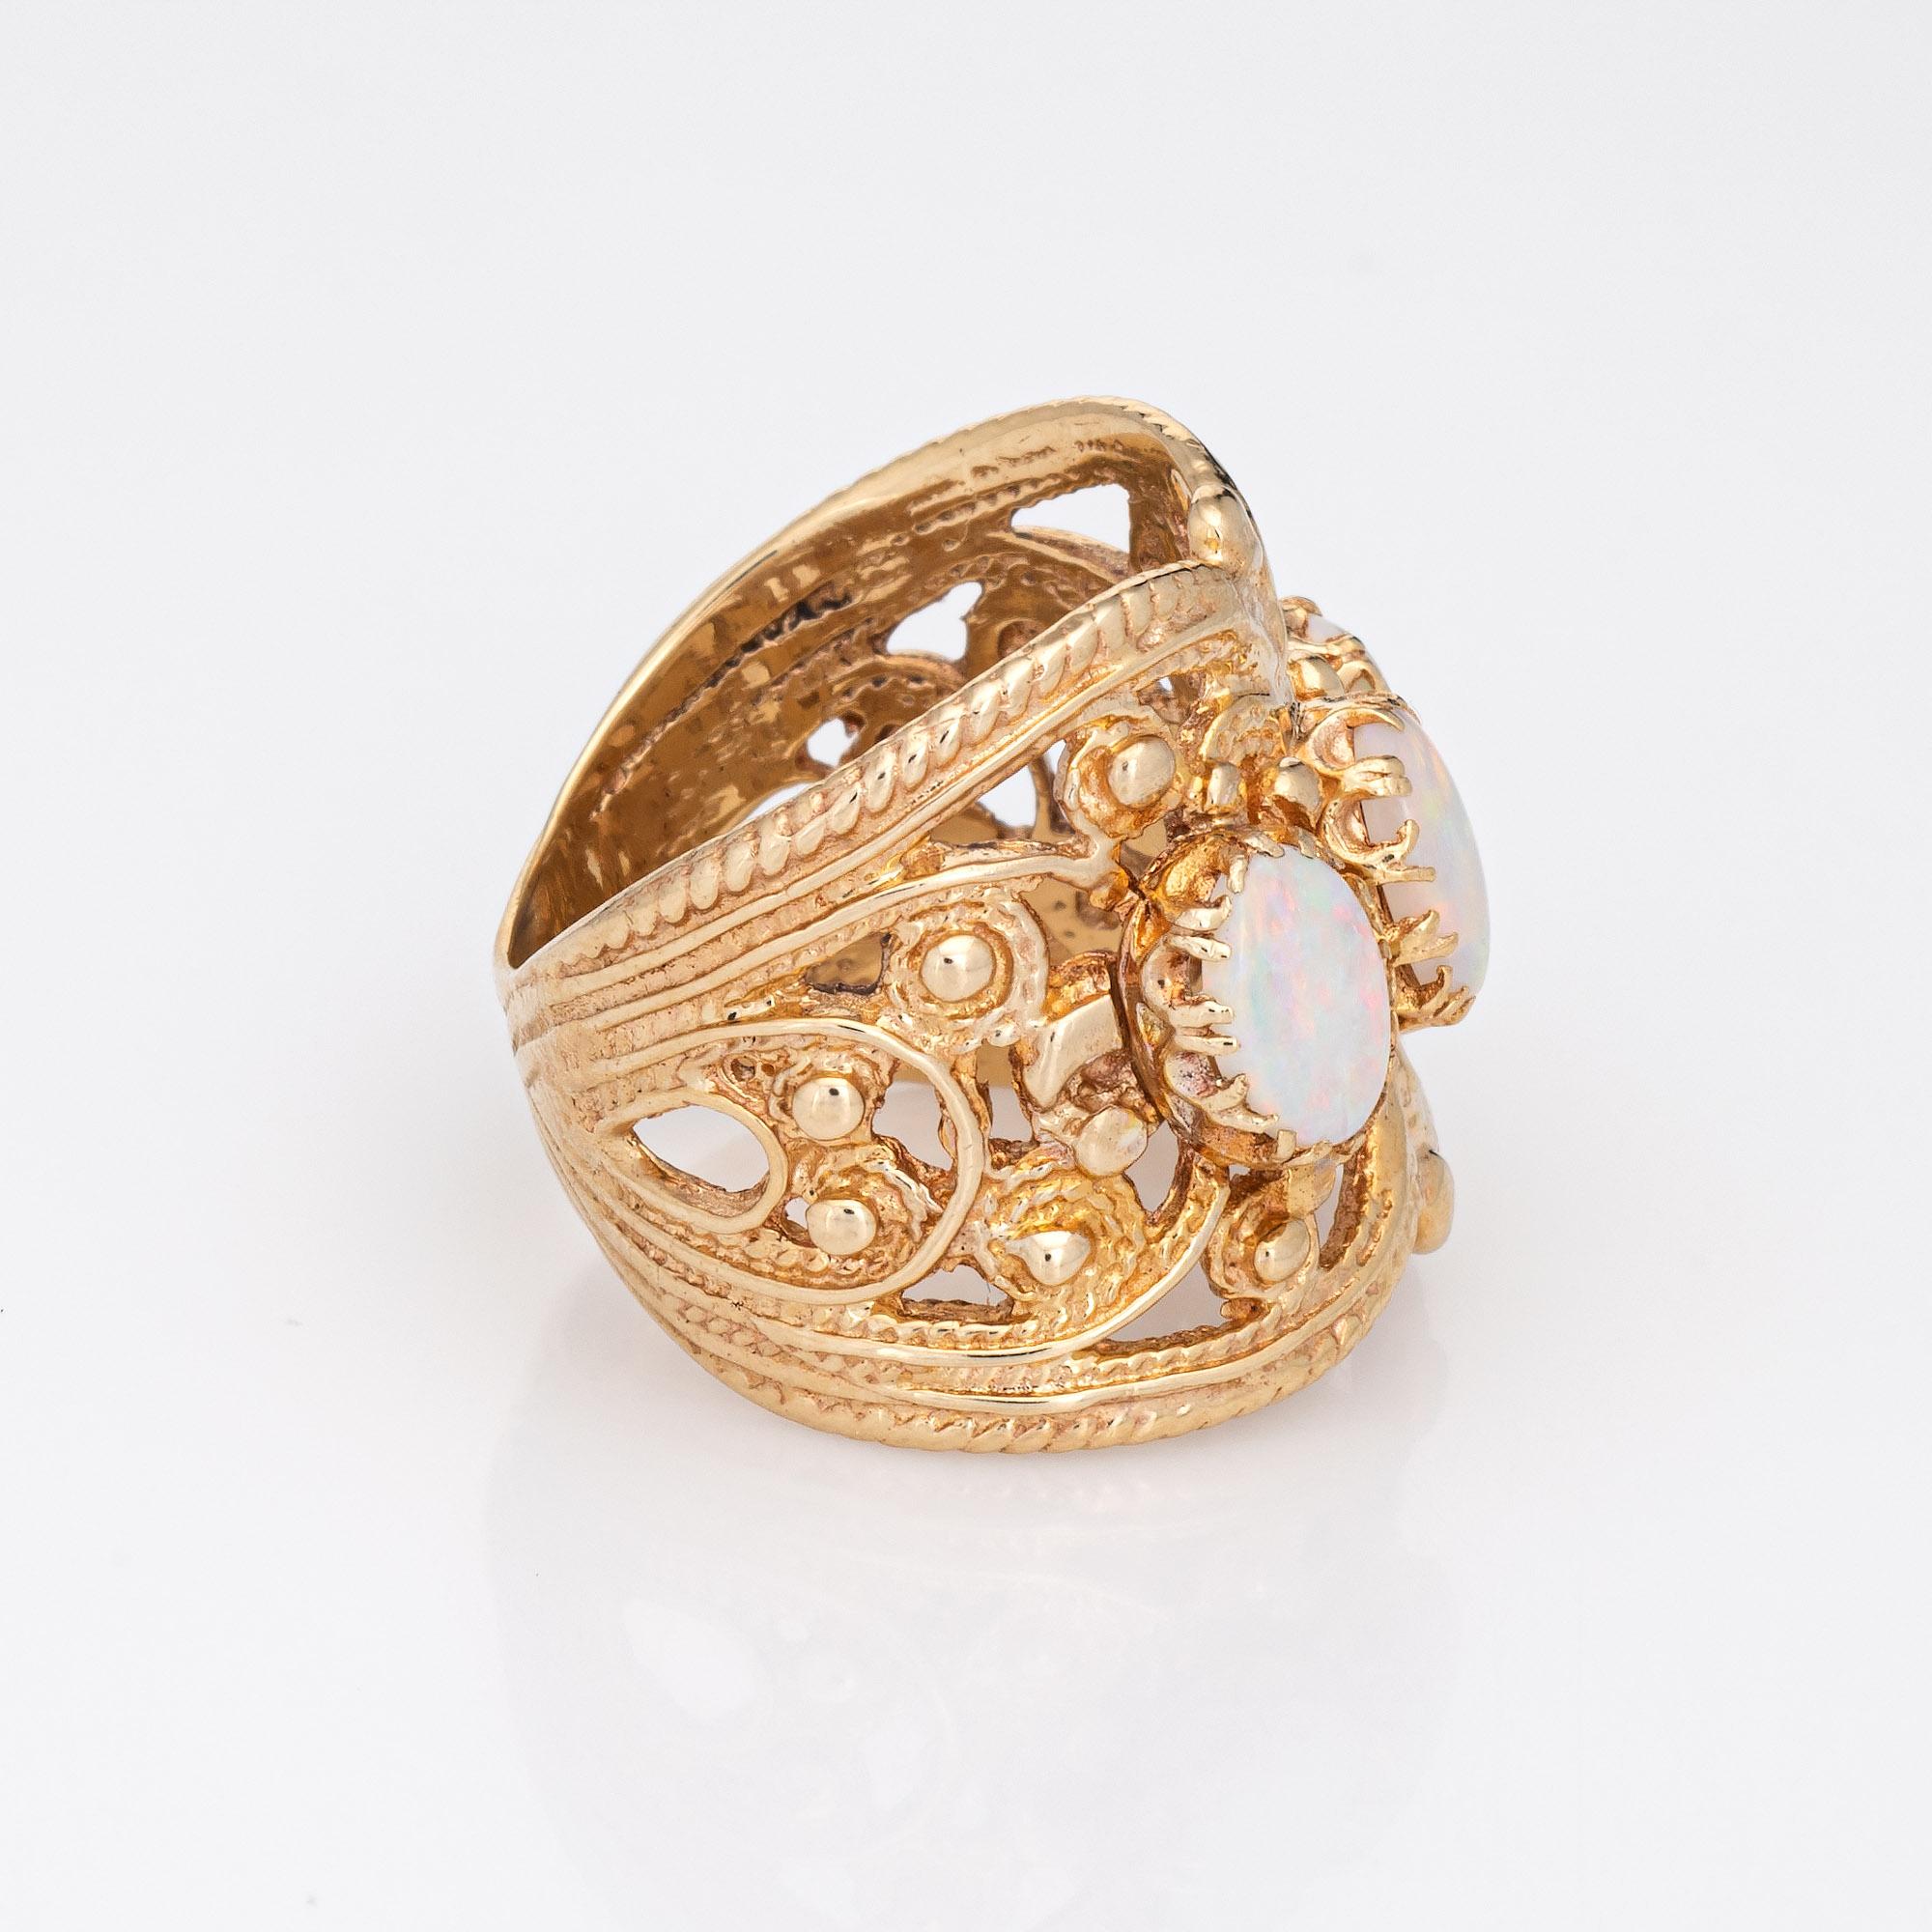 Stylish vintage opal wide band cigar ring crafted in 14 karat yellow gold. 

Three opal are estimated at 0.50 carats each and total an estimated 1.50 carats. The opals are in very good condition and free of cracks or chips.

The wide band ring (19mm